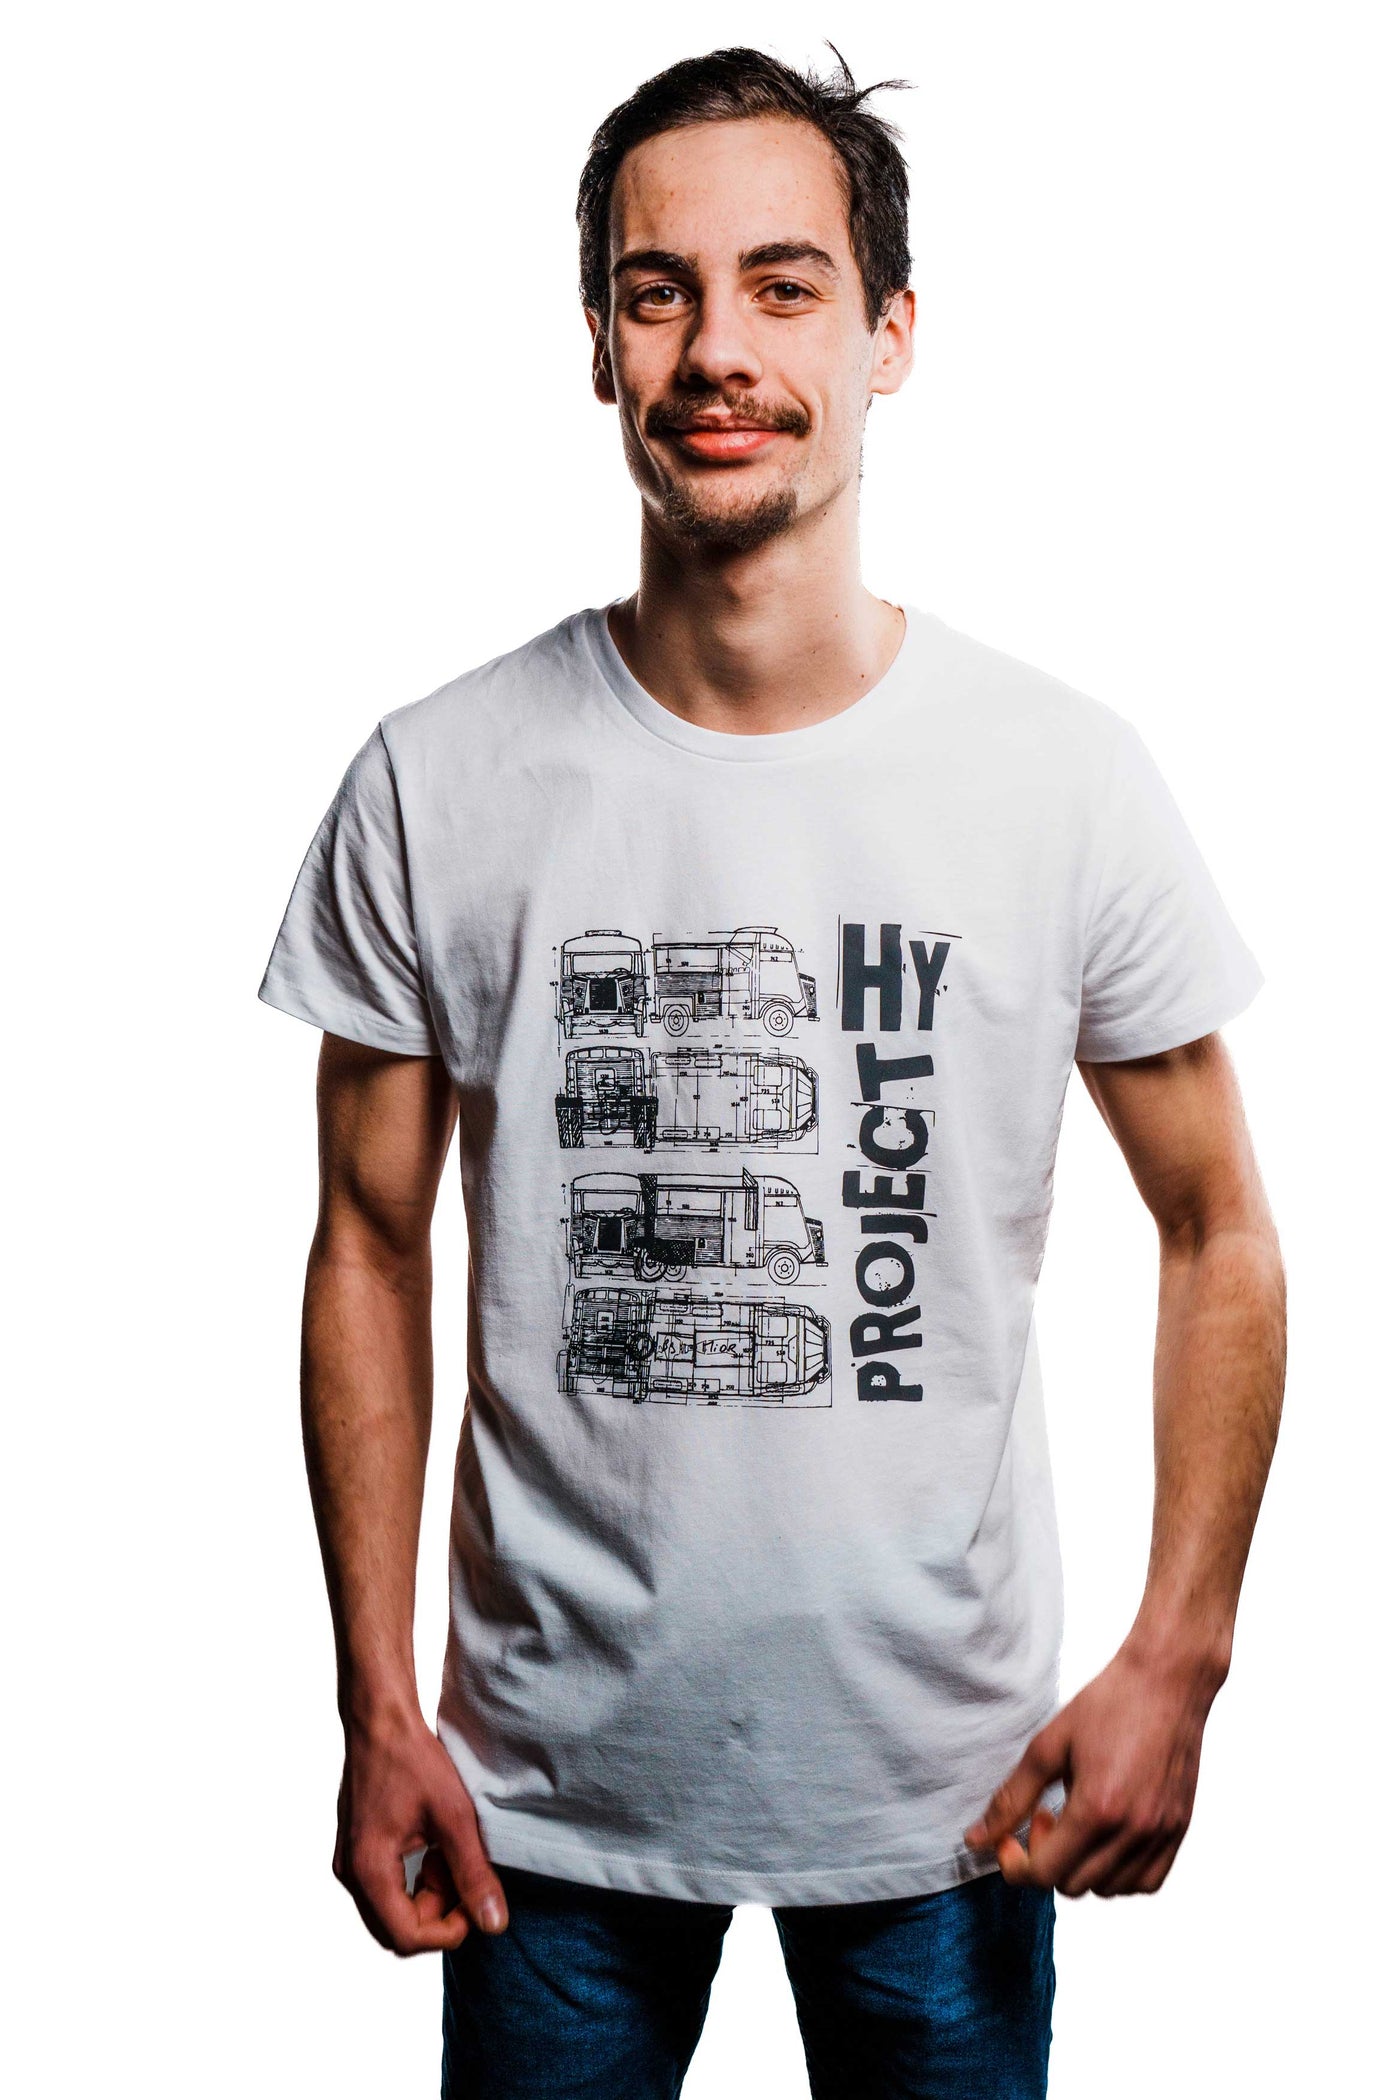 LE T-SHIRT HY PROJECT